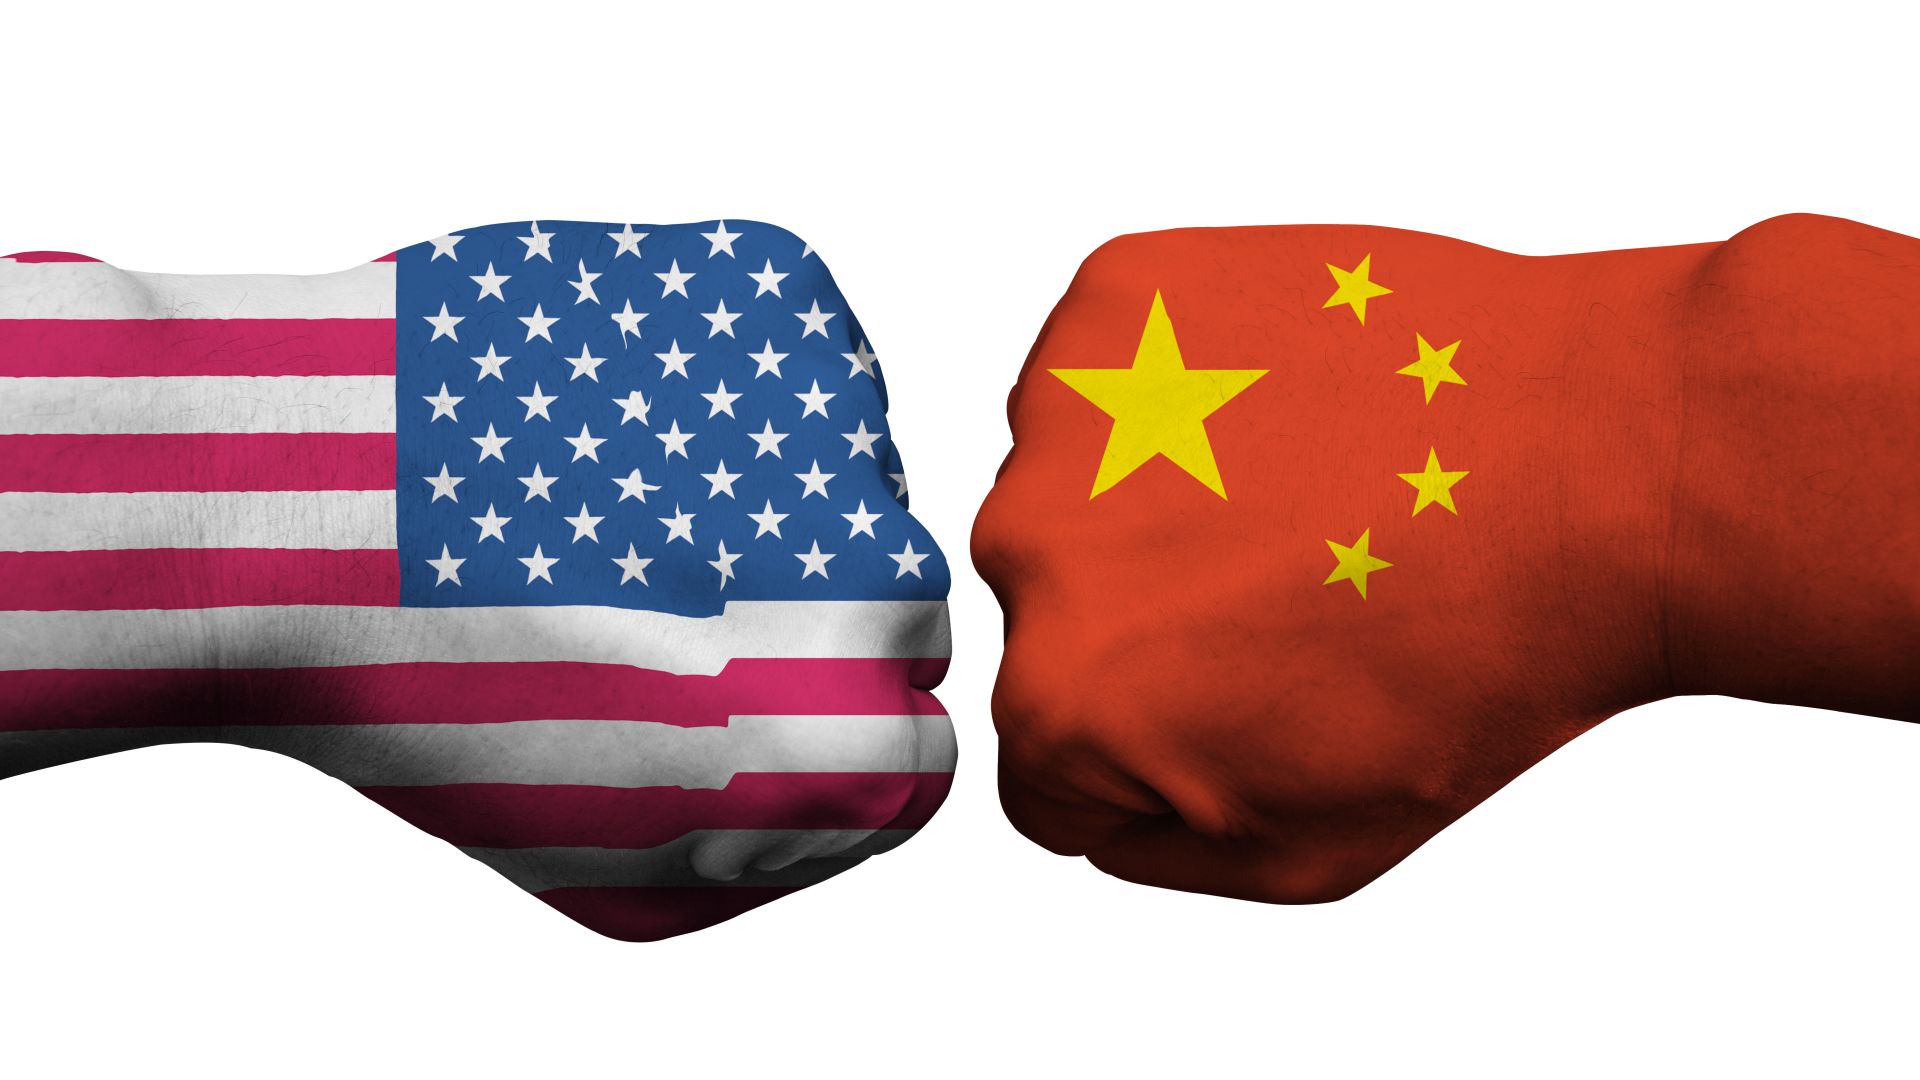 flags of usa and china on punch, on white backgrounds, usa vs china concepts